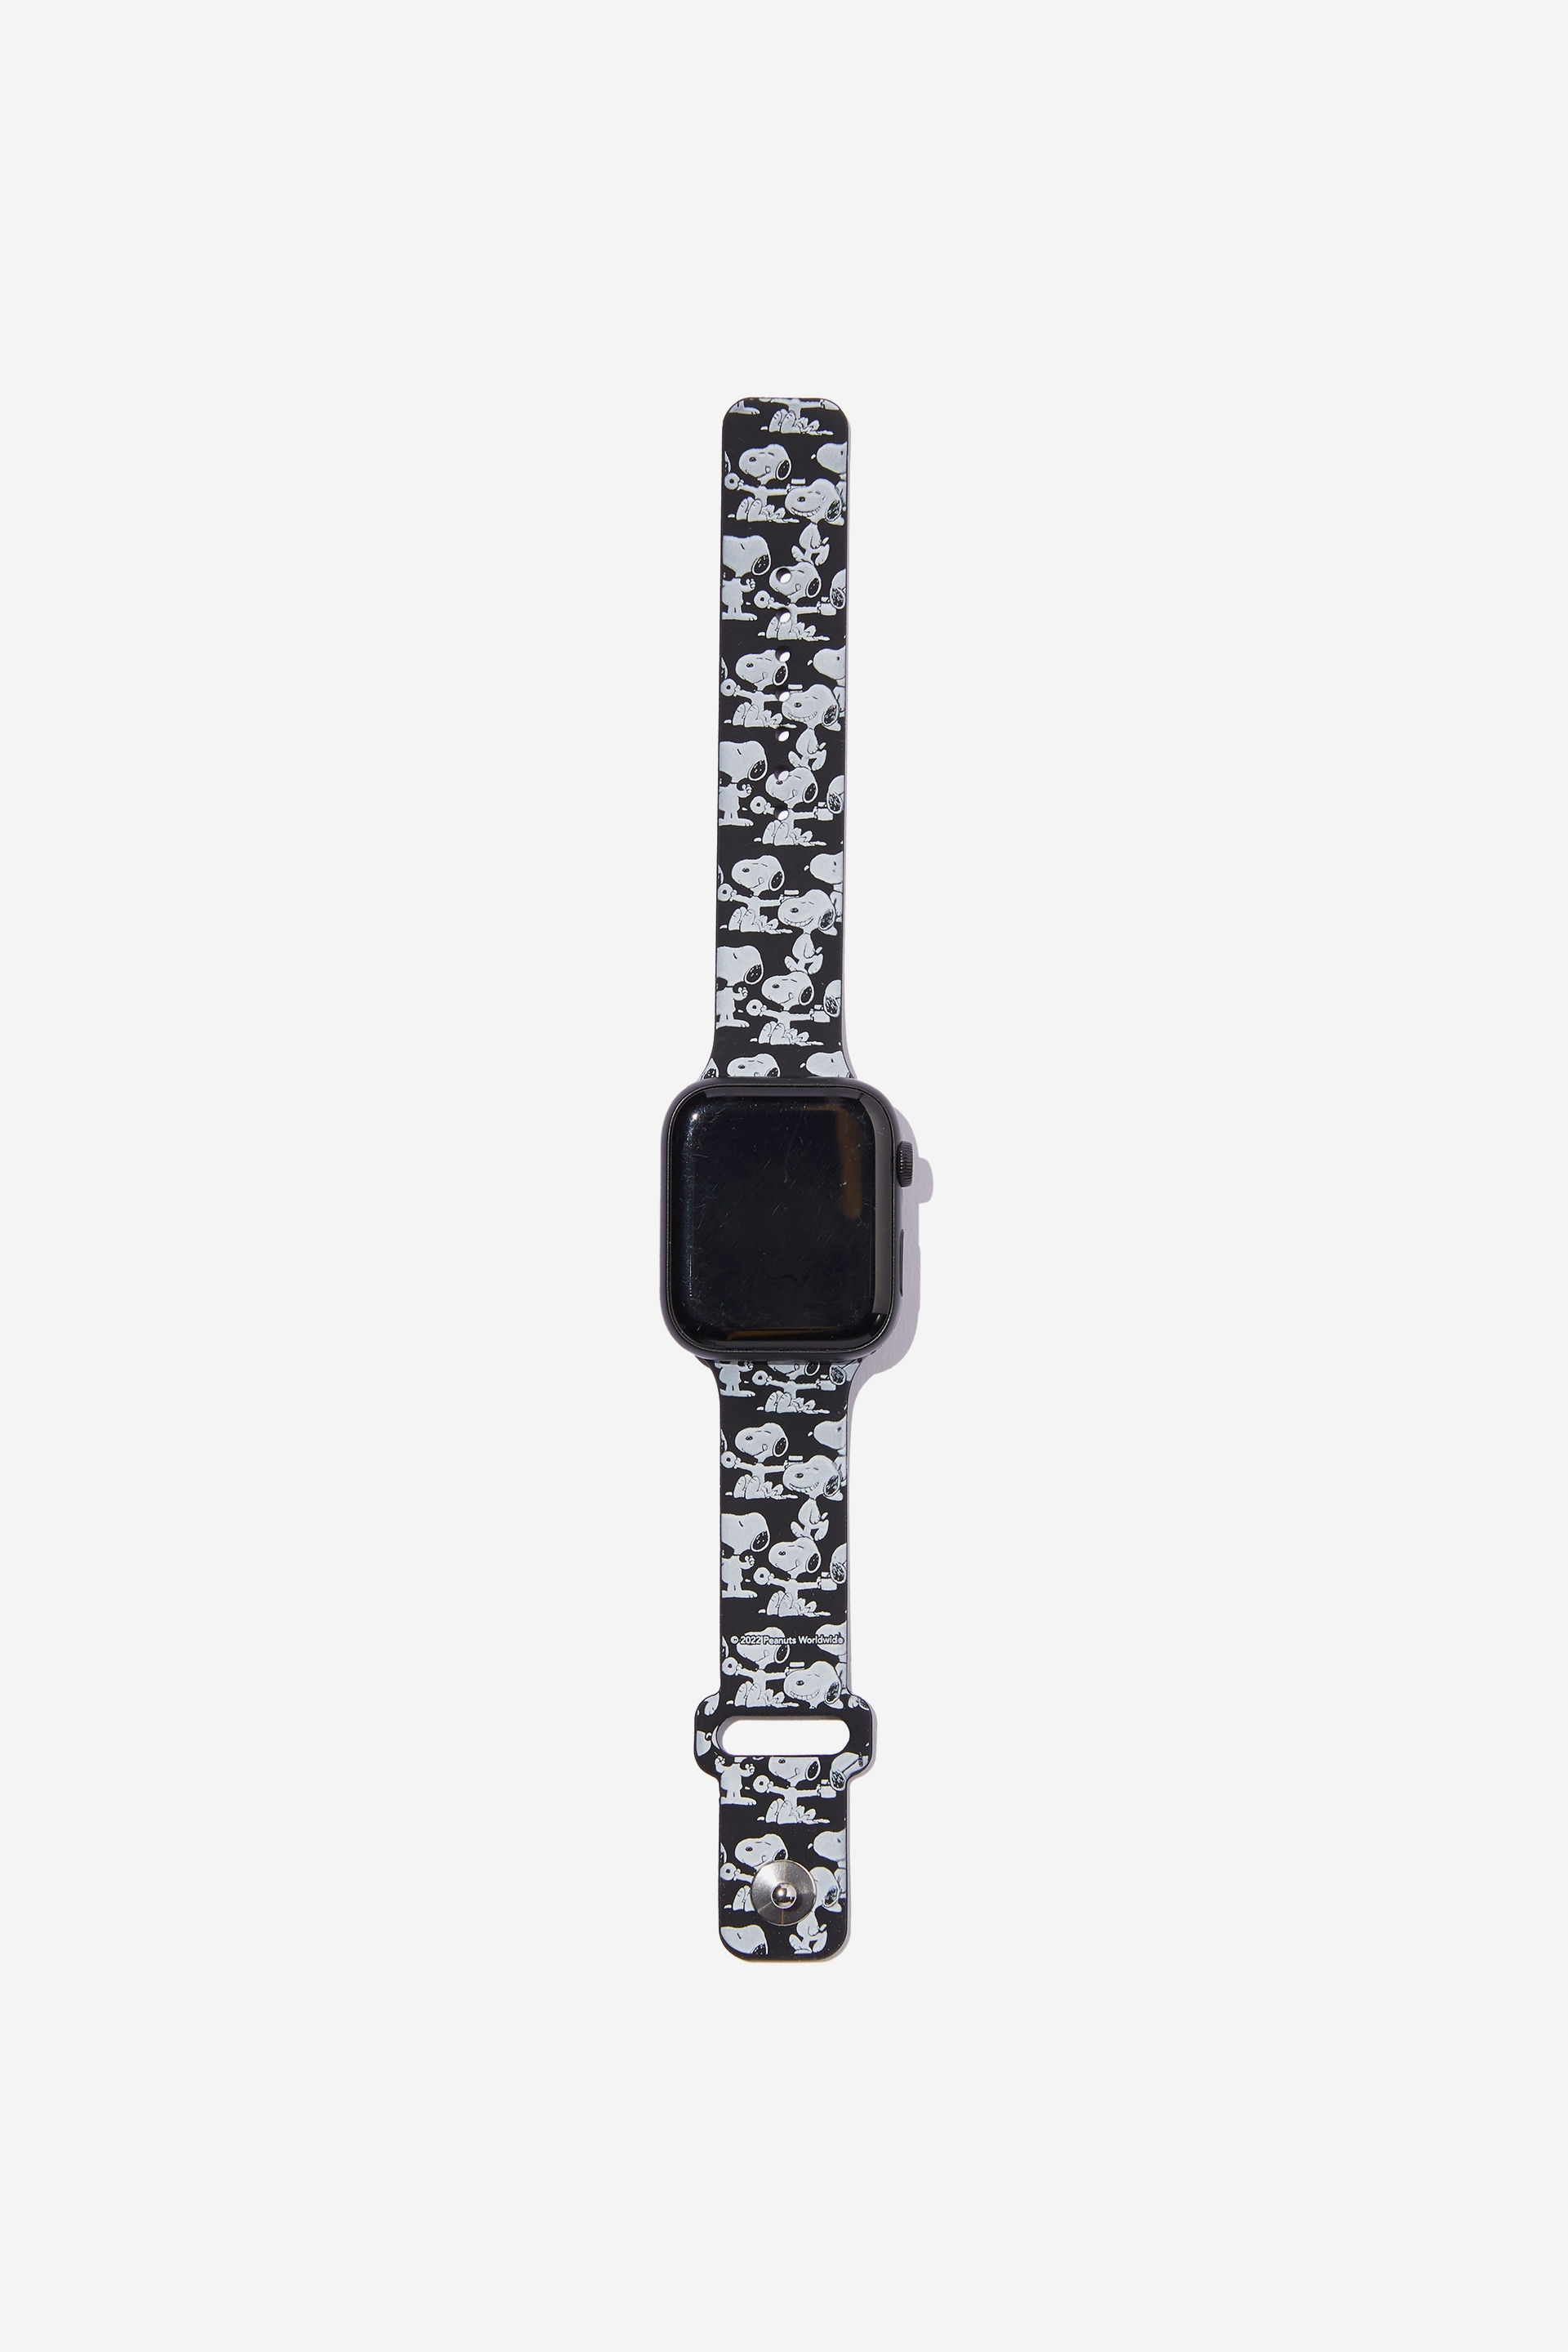 Typo - Peanuts Strapped Watch Strap - Lcn pea snoopy black